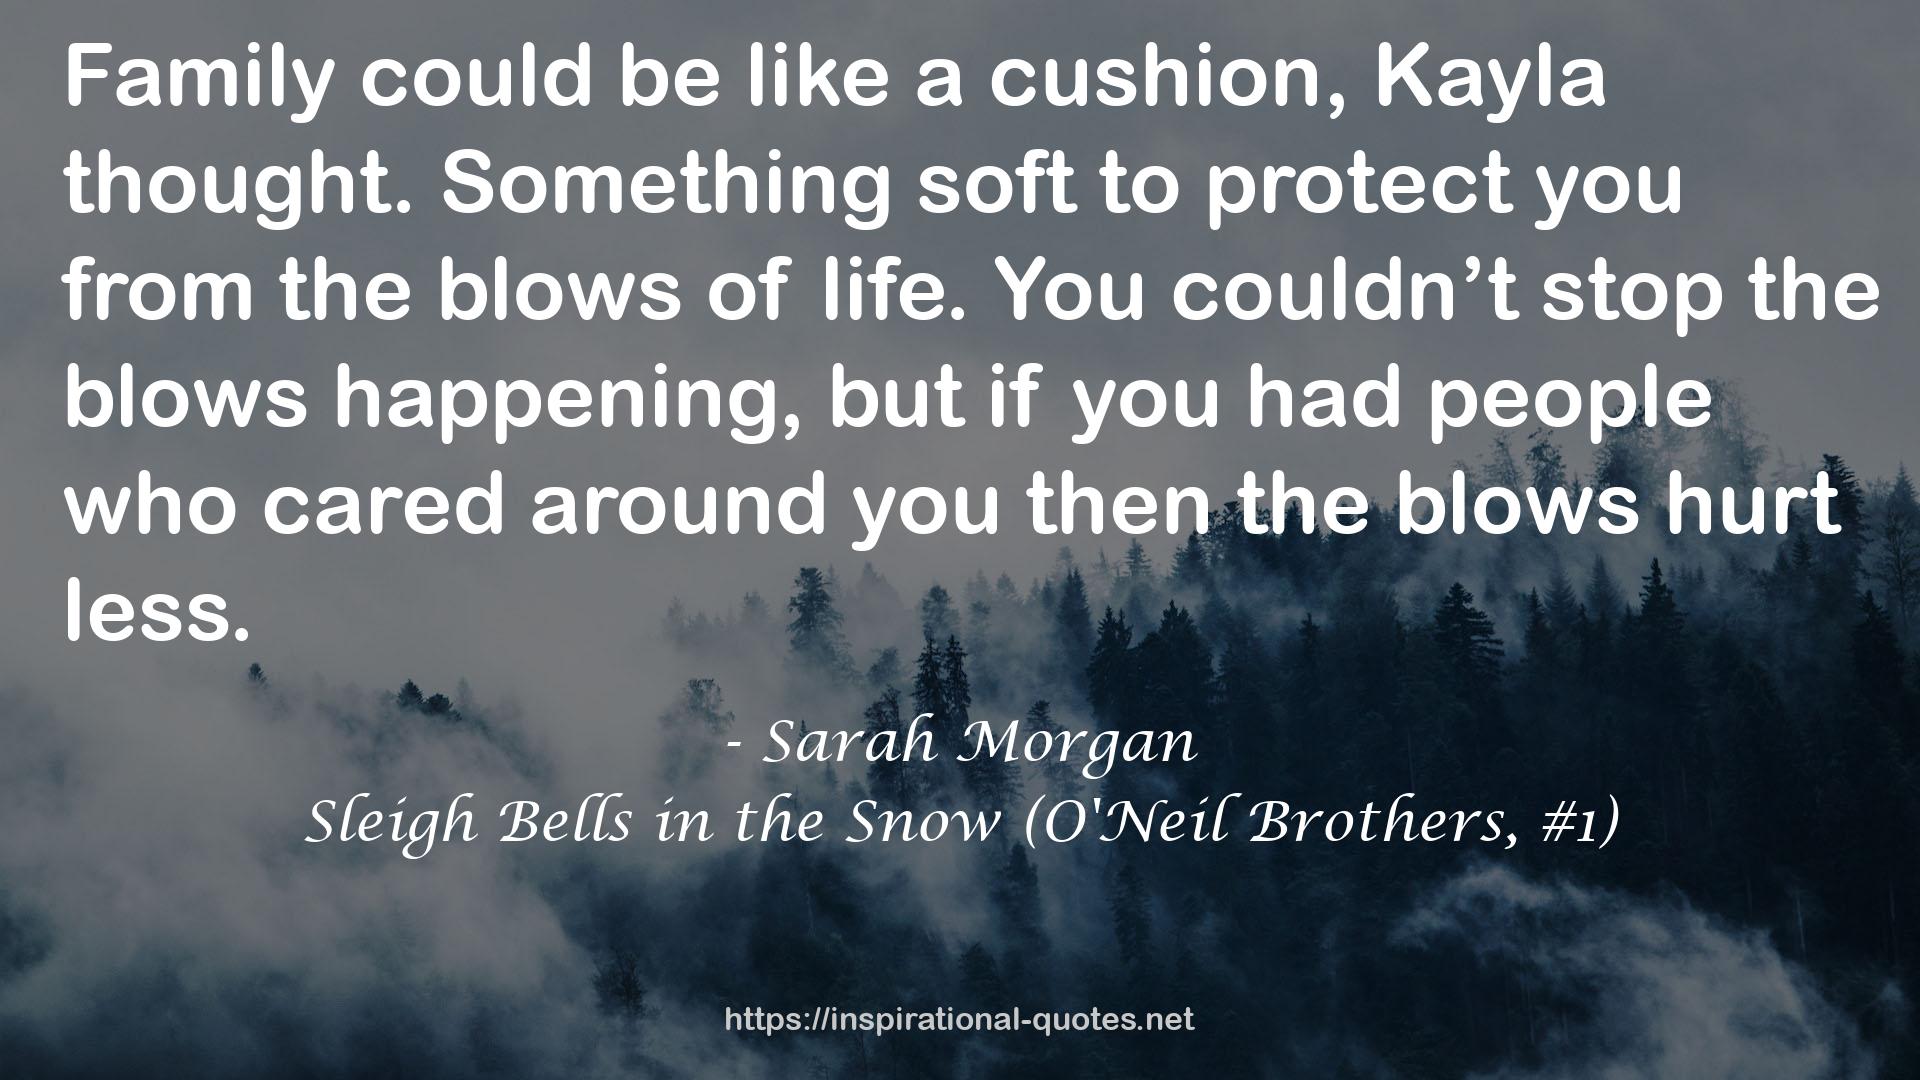 Sleigh Bells in the Snow (O'Neil Brothers, #1) QUOTES